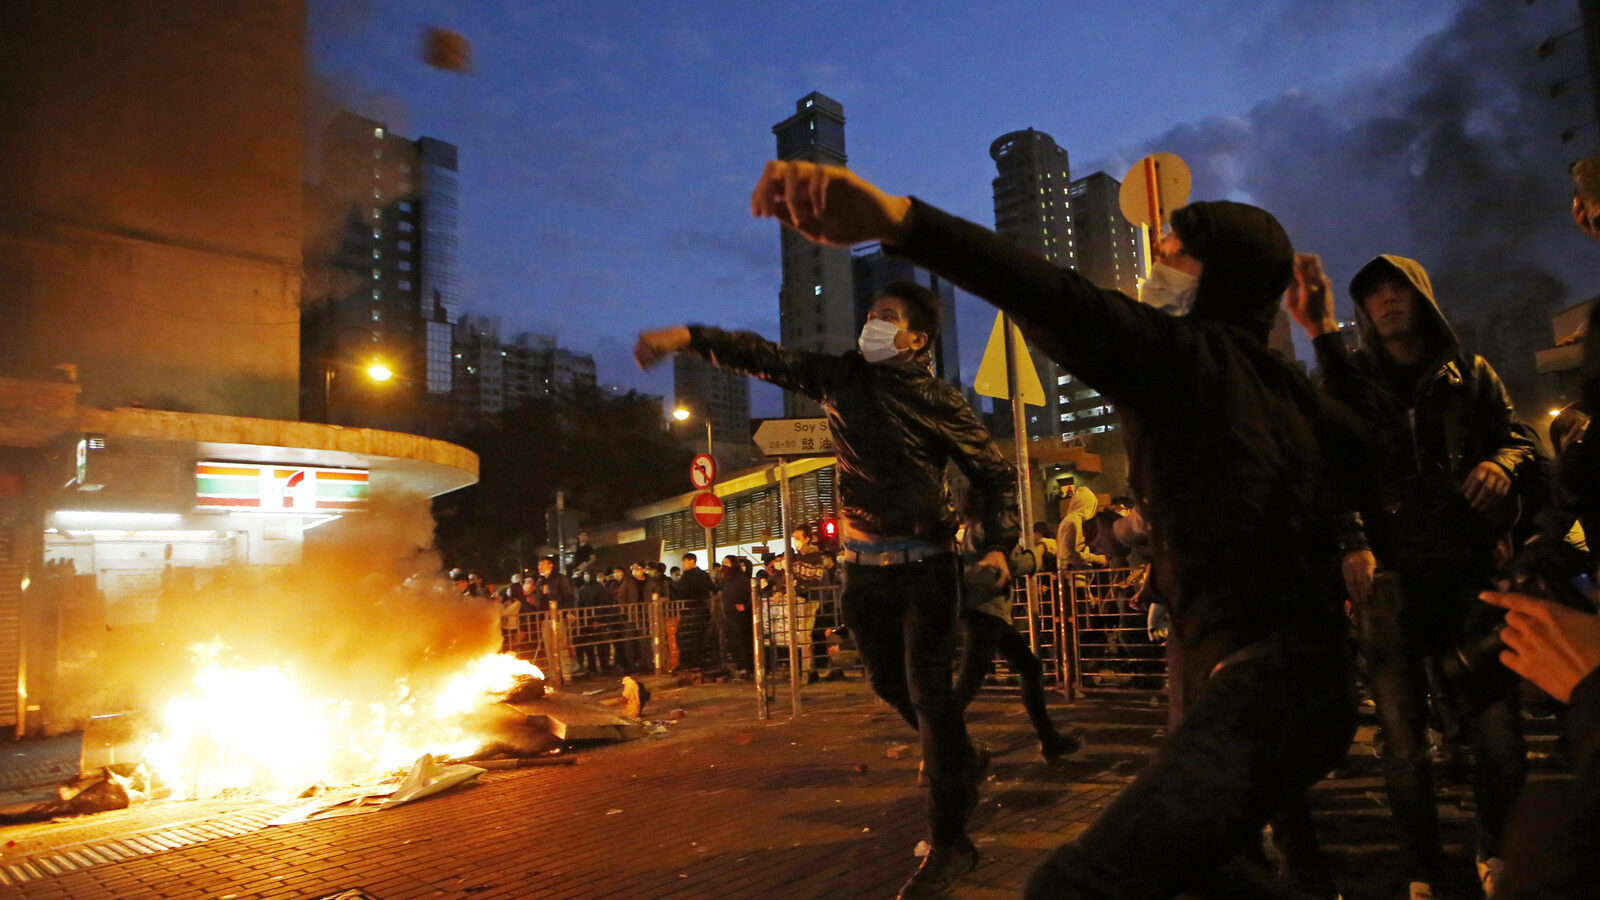 Protestors throw bricks at police and light fires on streets in Mongkok district of Hong Kong, Tuesday, Feb. 9, 2016. Protesters engaged in running battles with police, pelting officers with bricks and bottles and setting fires on the street Monday night and early Tuesday. (AP Photo/Kin Cheung)